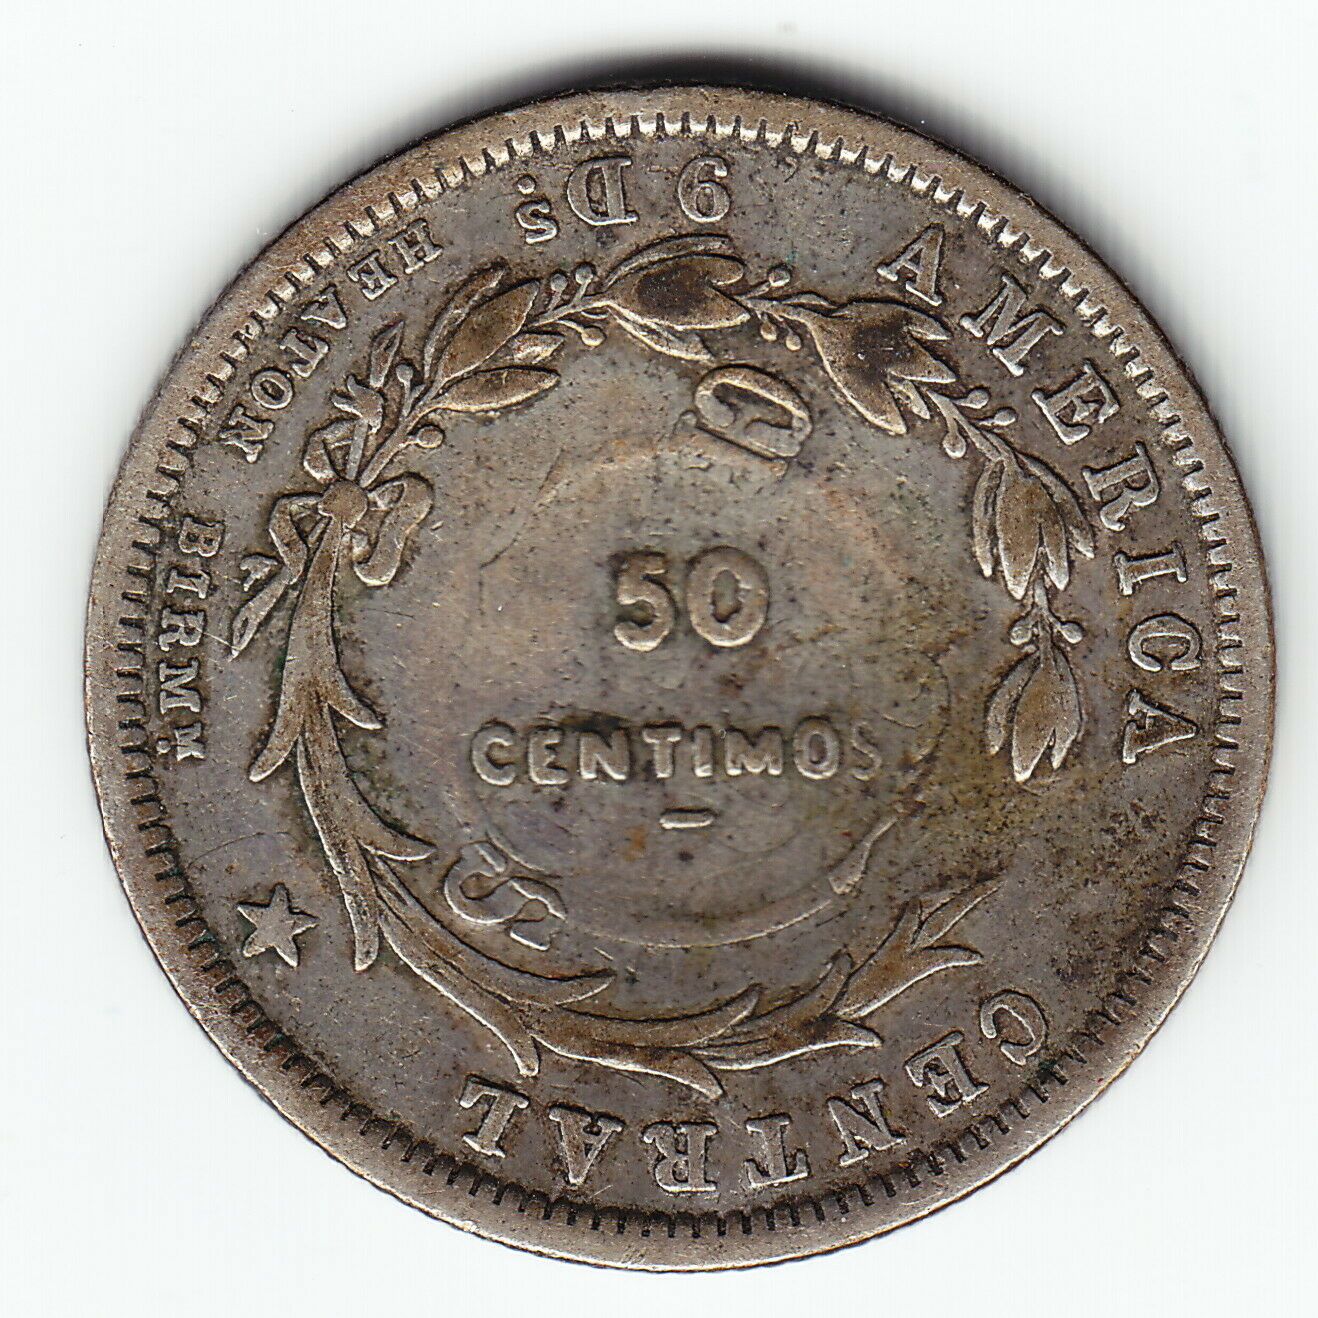 Countermarked coinage - 50 Centimos (1923)